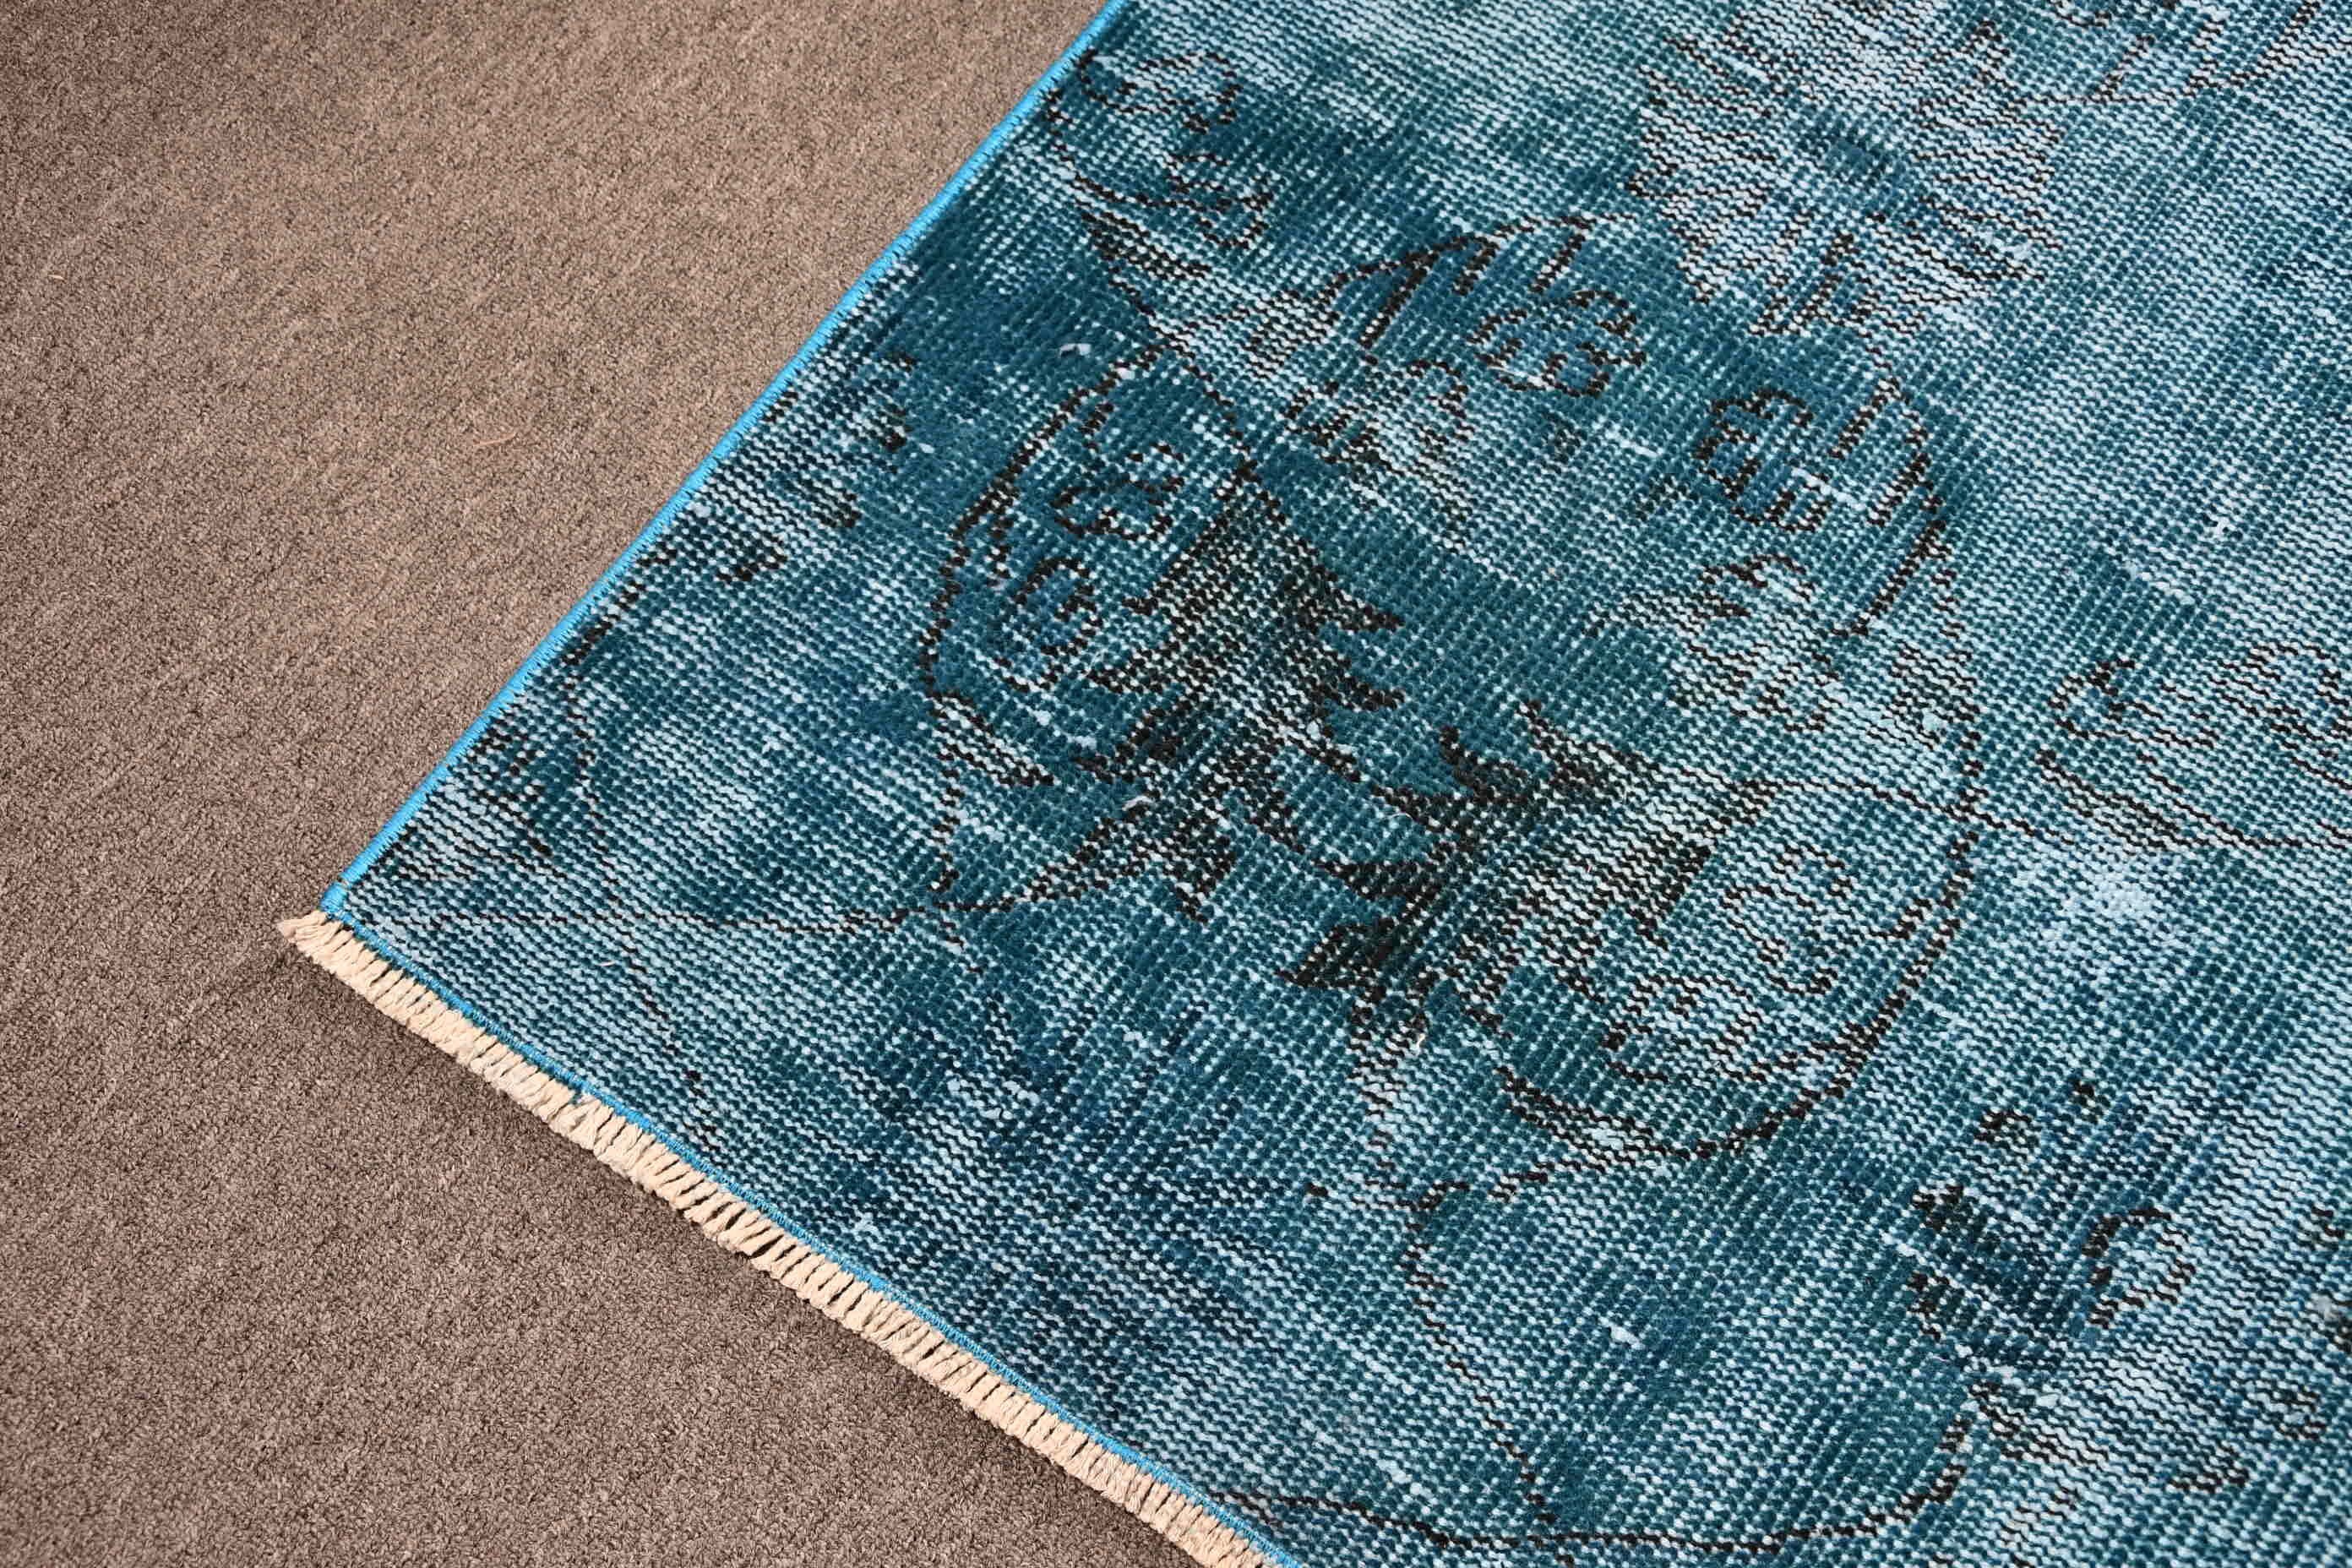 Rugs for Kitchen, Vintage Rugs, 4.5x5.1 ft Accent Rugs, Vintage Accent Rug Rugs, Turkish Rug, Bedroom Rug, Moroccan Rug, Blue Kitchen Rugs